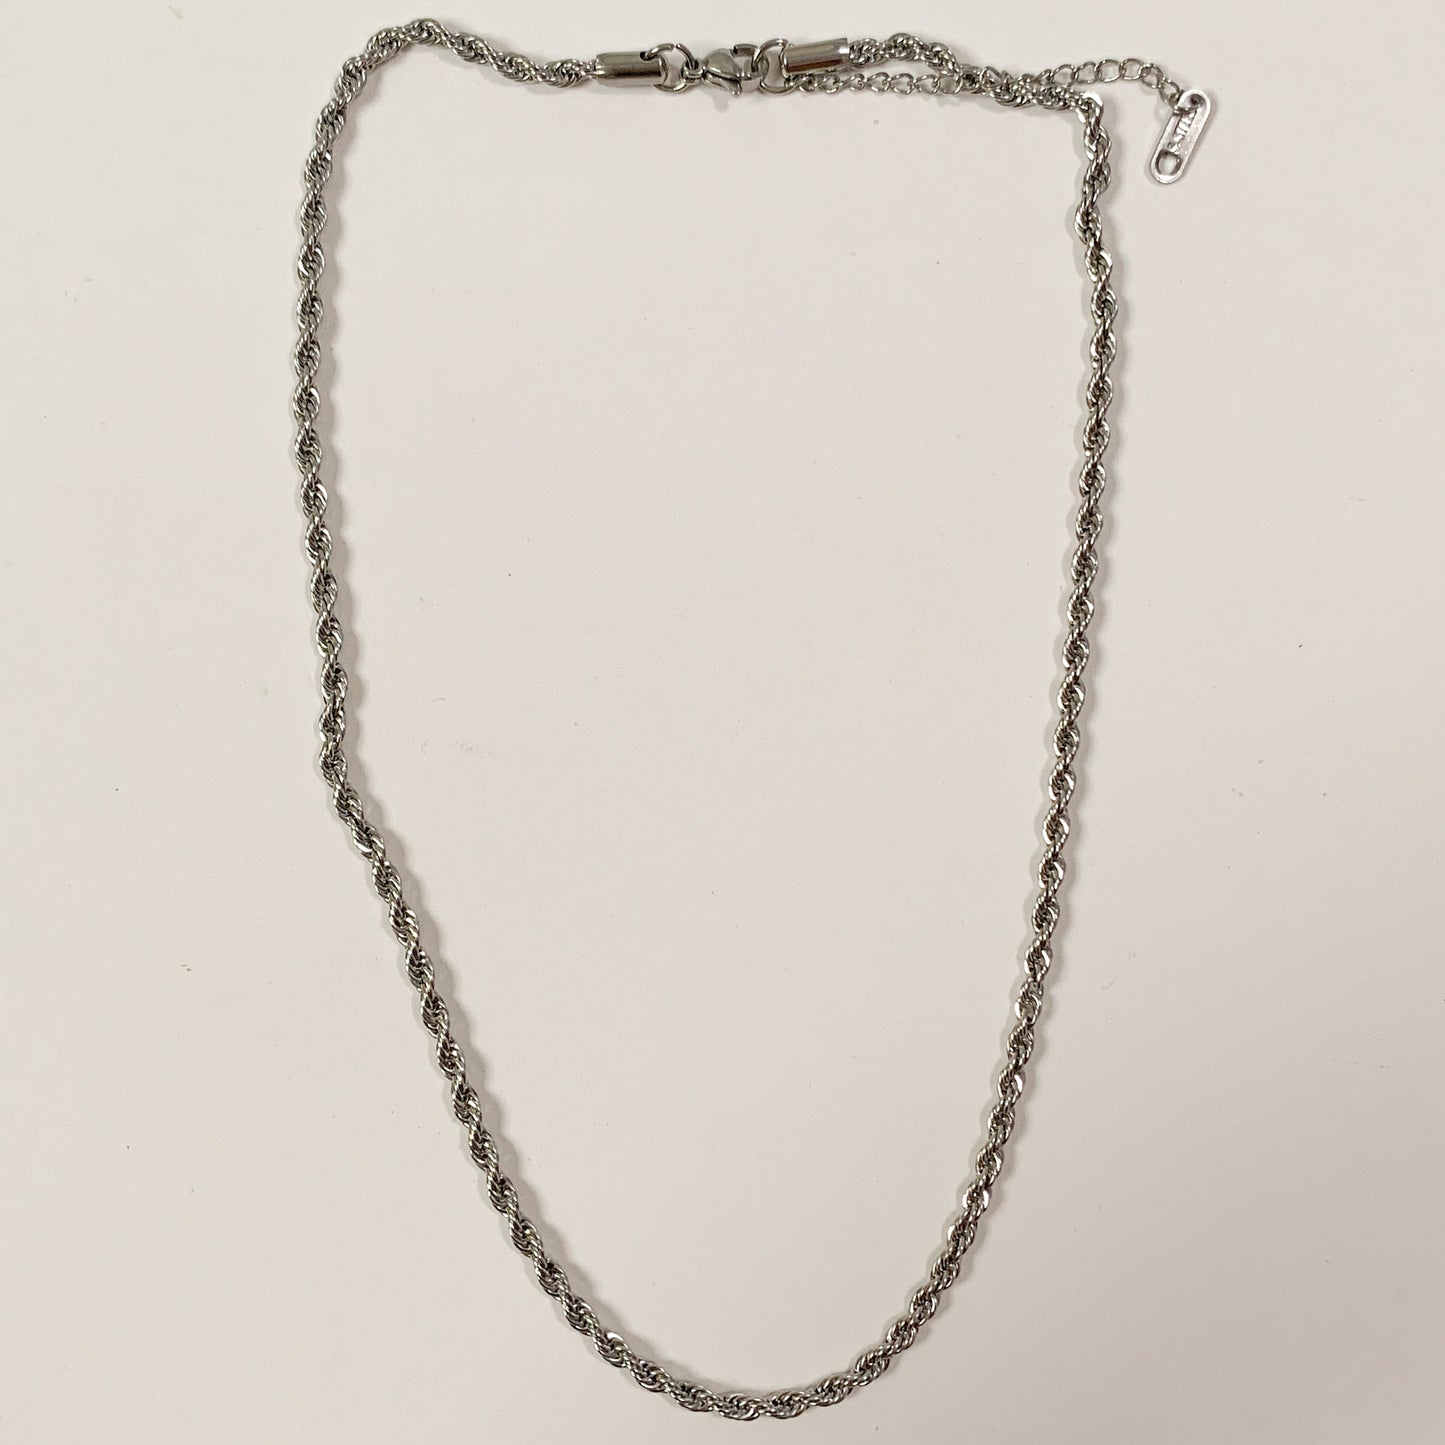 Cameron Chain Necklace